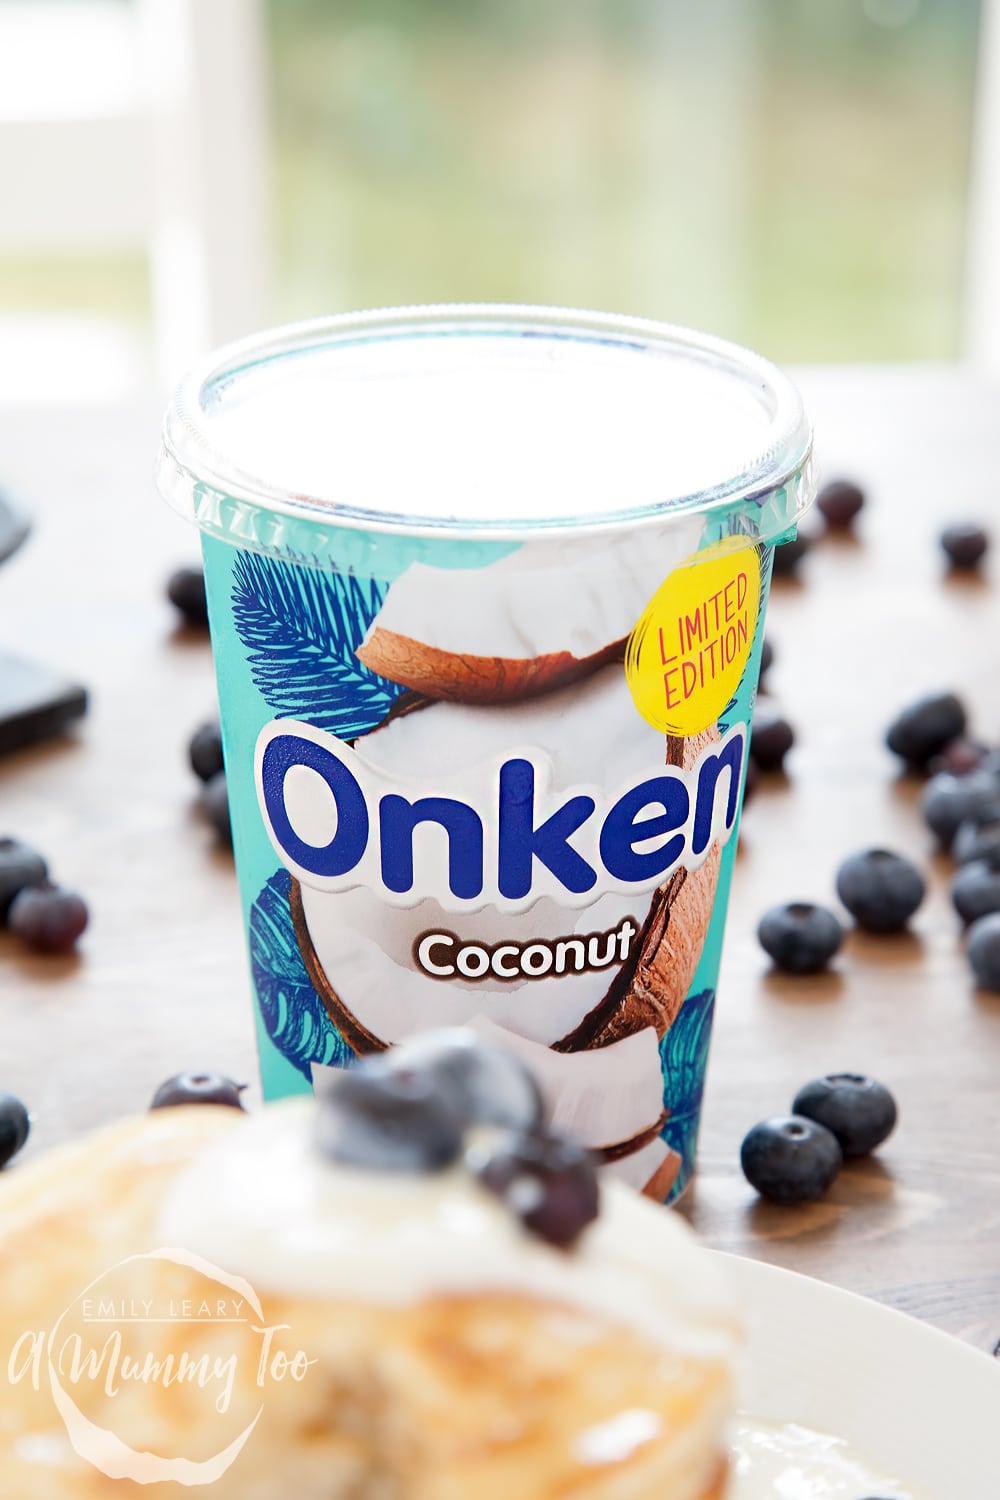 Onken coconut biopot yogurt surrounded by blueberries and fluffy panckes.